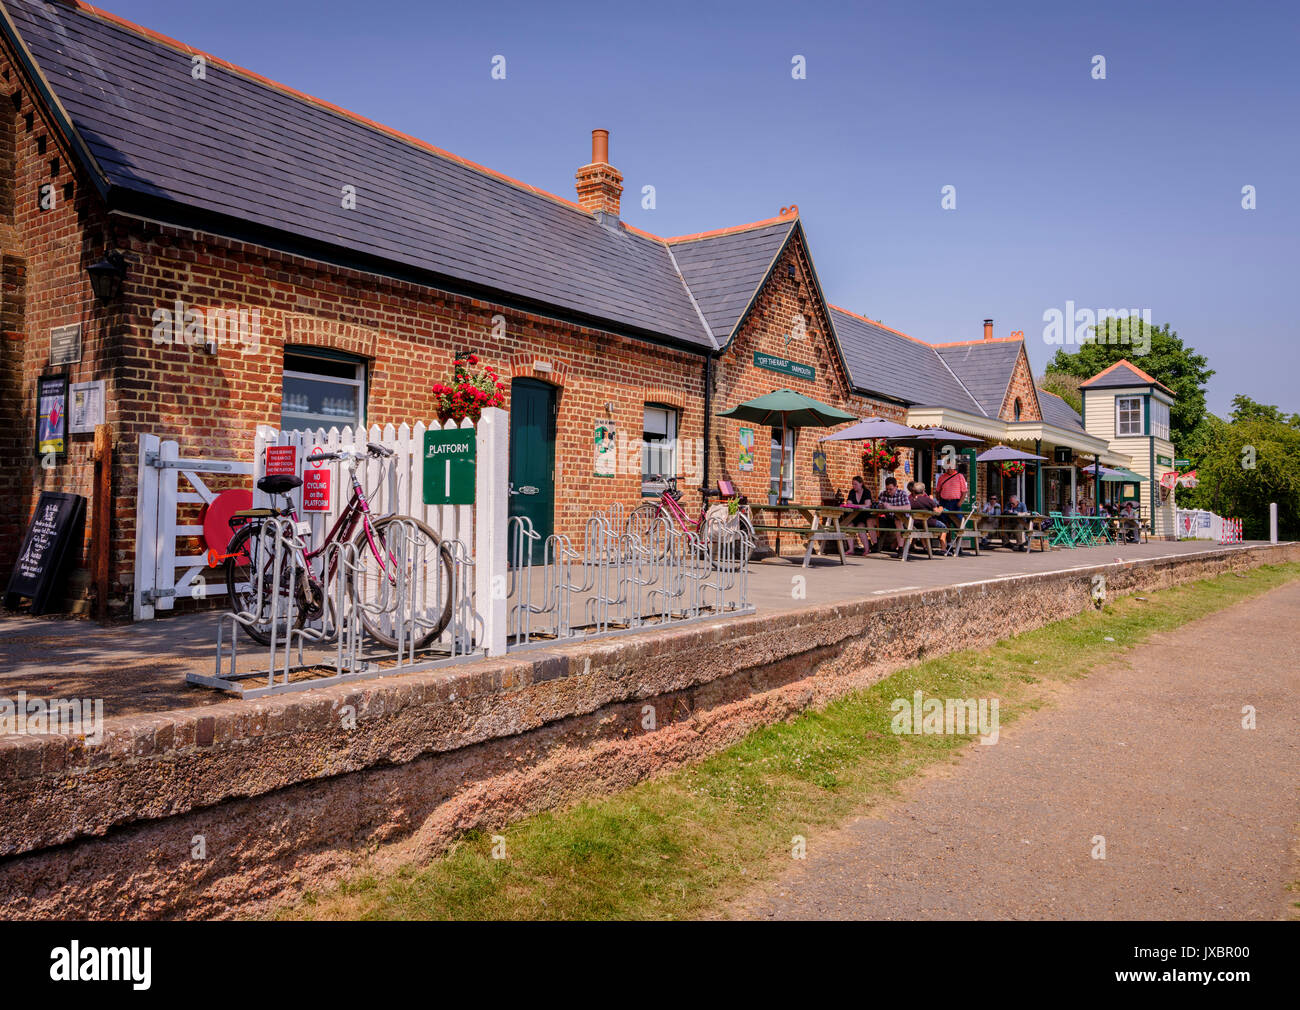 The old station at Yarmouth on the Isle of Wight. Now a restaurant